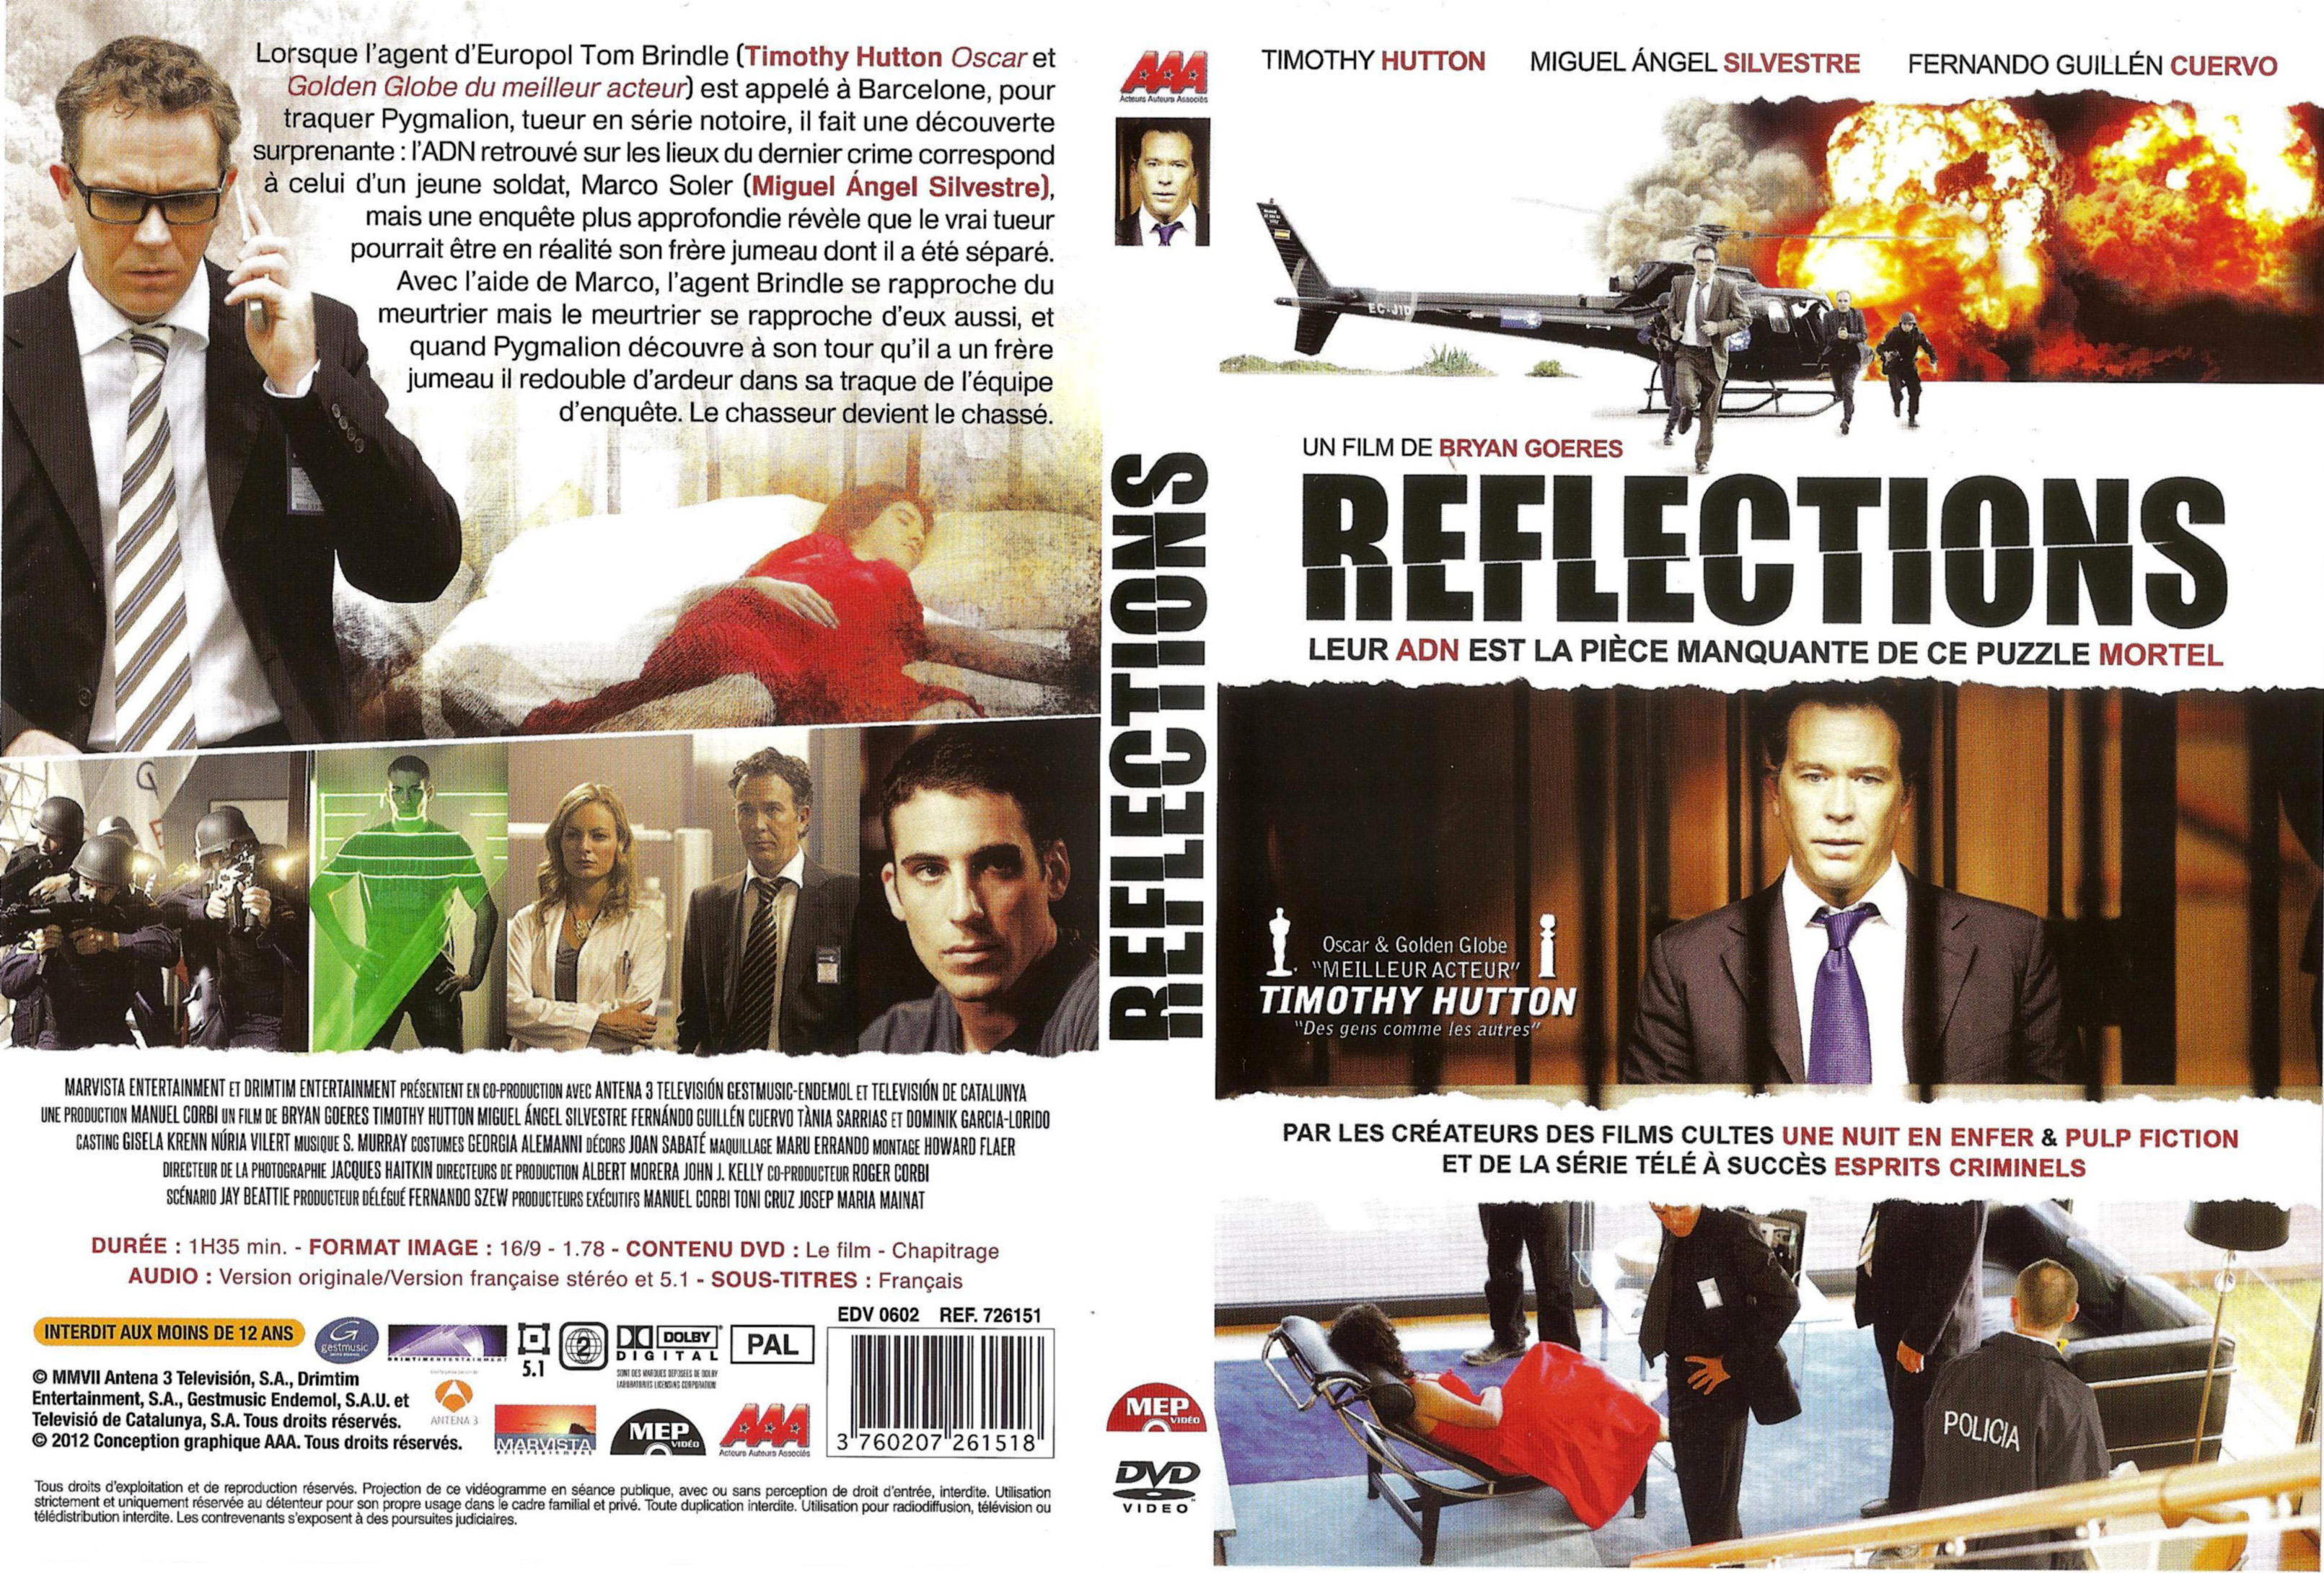 Jaquette DVD Reflections